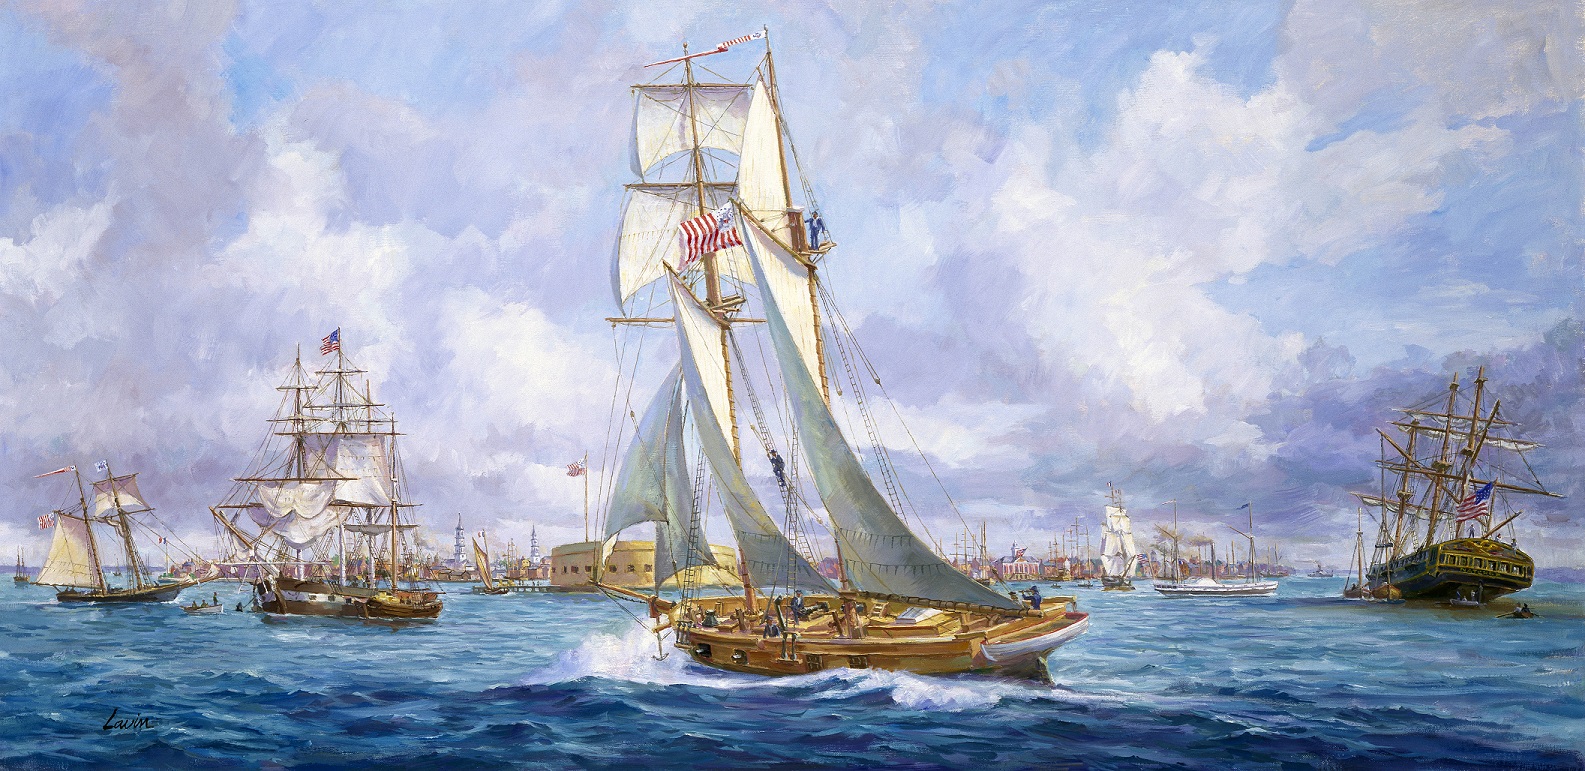 The painting “Enforcing the Tariff” by painter Bob Lavin, showing a cutter enforcing Federal tariffs in Charleston Harbor during the 1833 Nullification Crisis. (U.S. Coast Guard Collection)